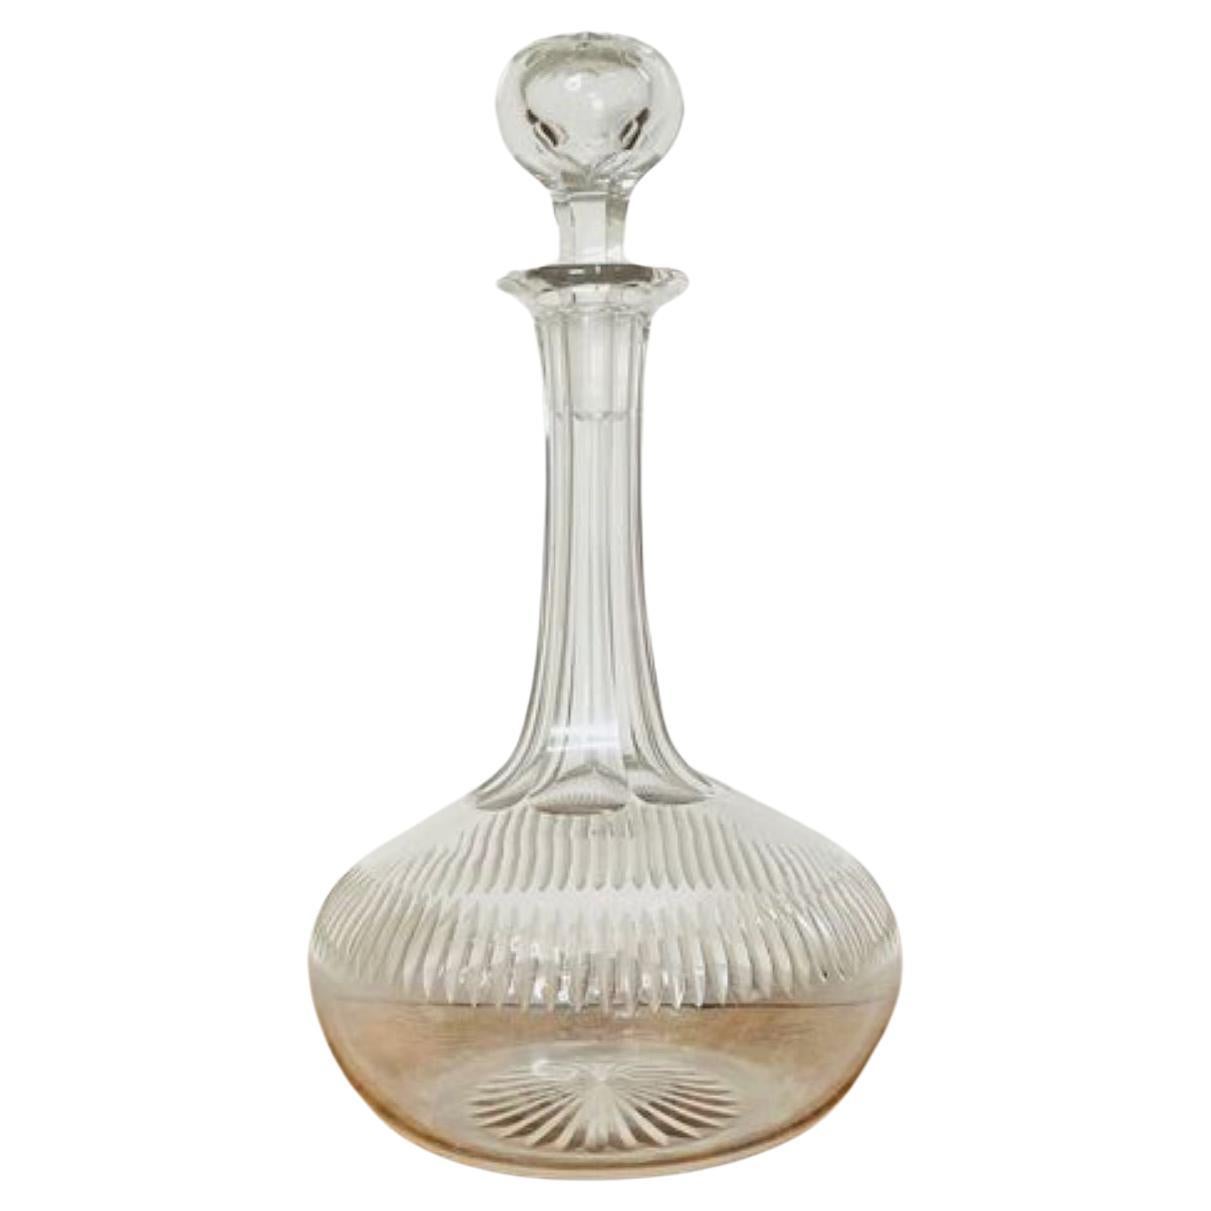 Quality antique Victorian cut glass decanter  For Sale